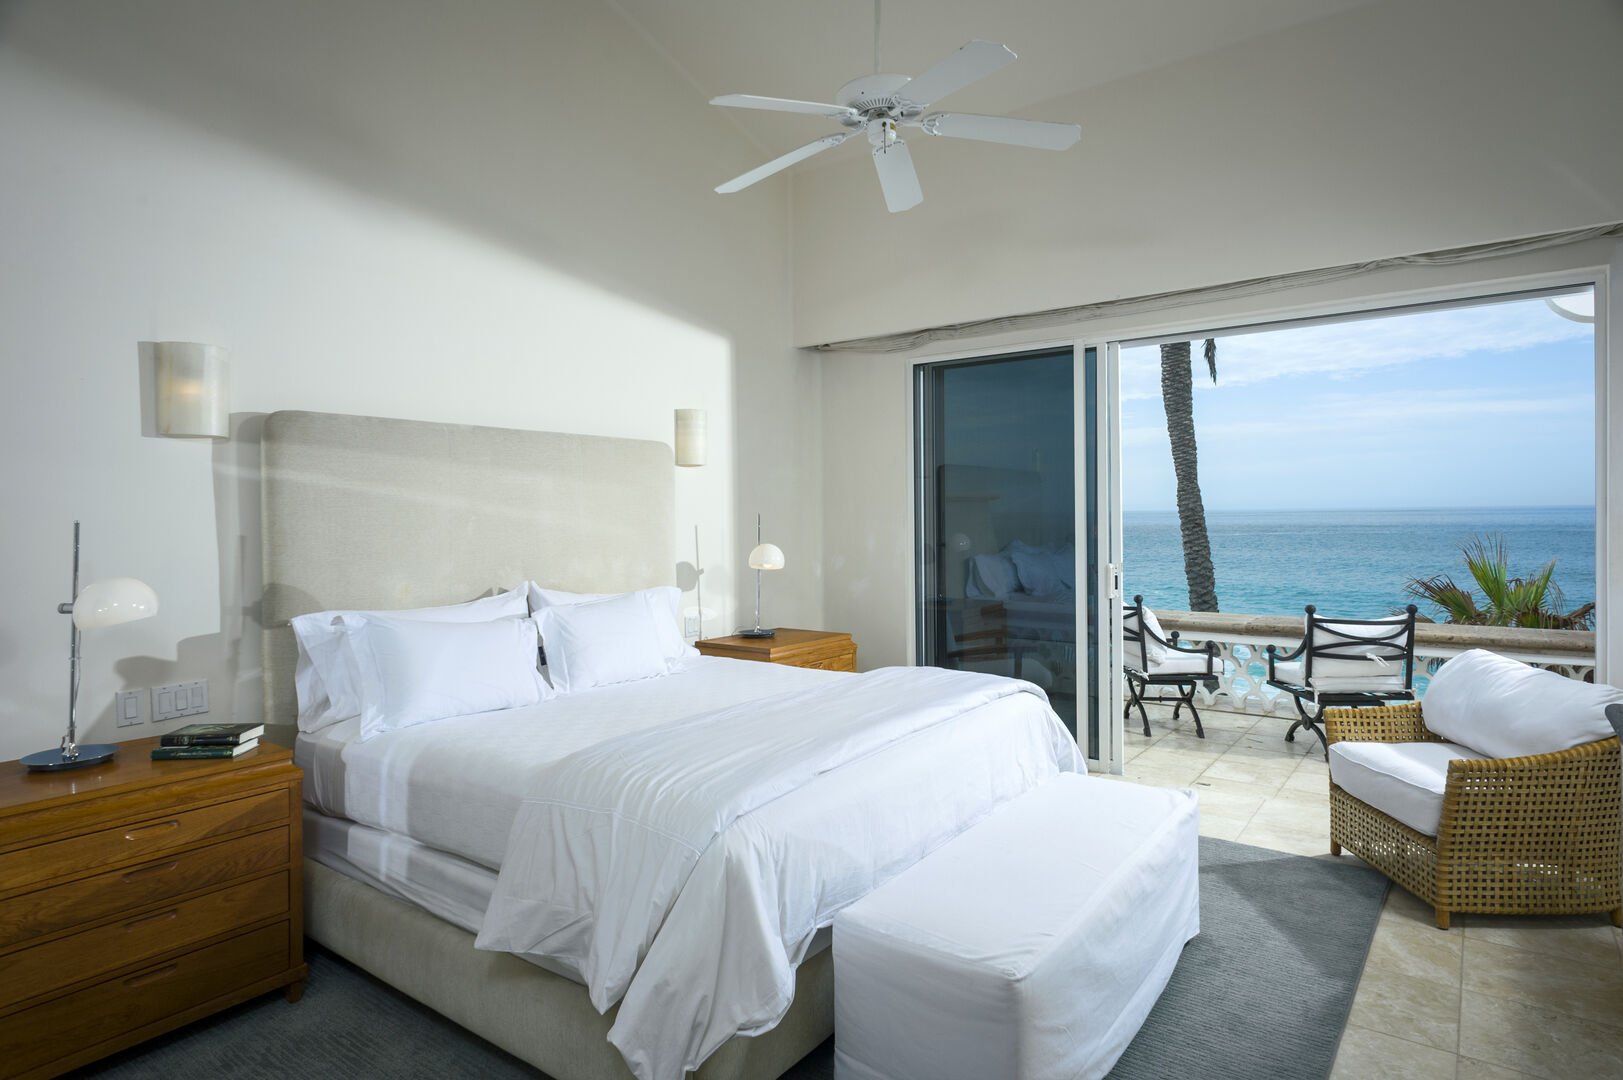 Master bedroom with a king-size bed and the ocean view